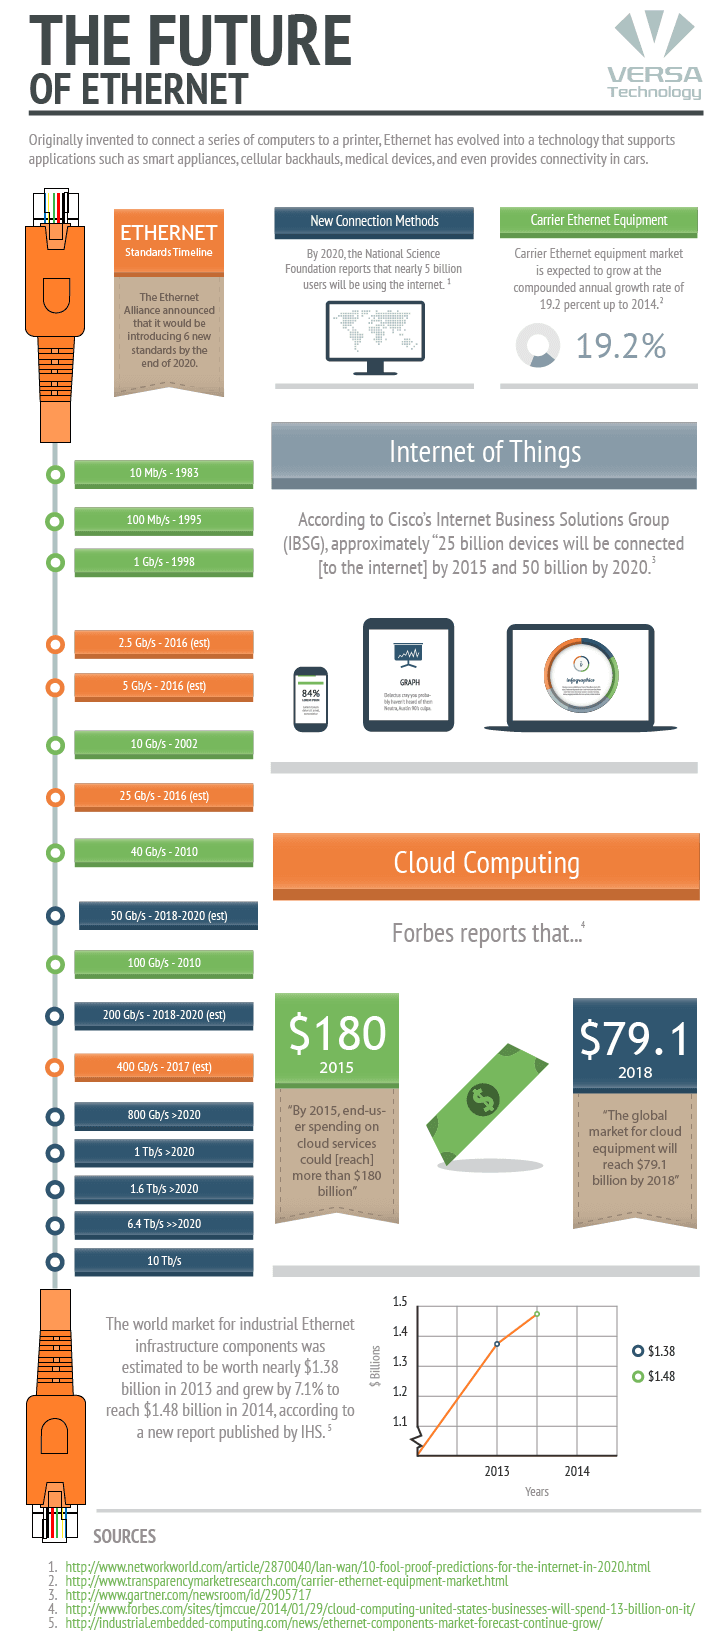 The Future of Ethernet Infographic